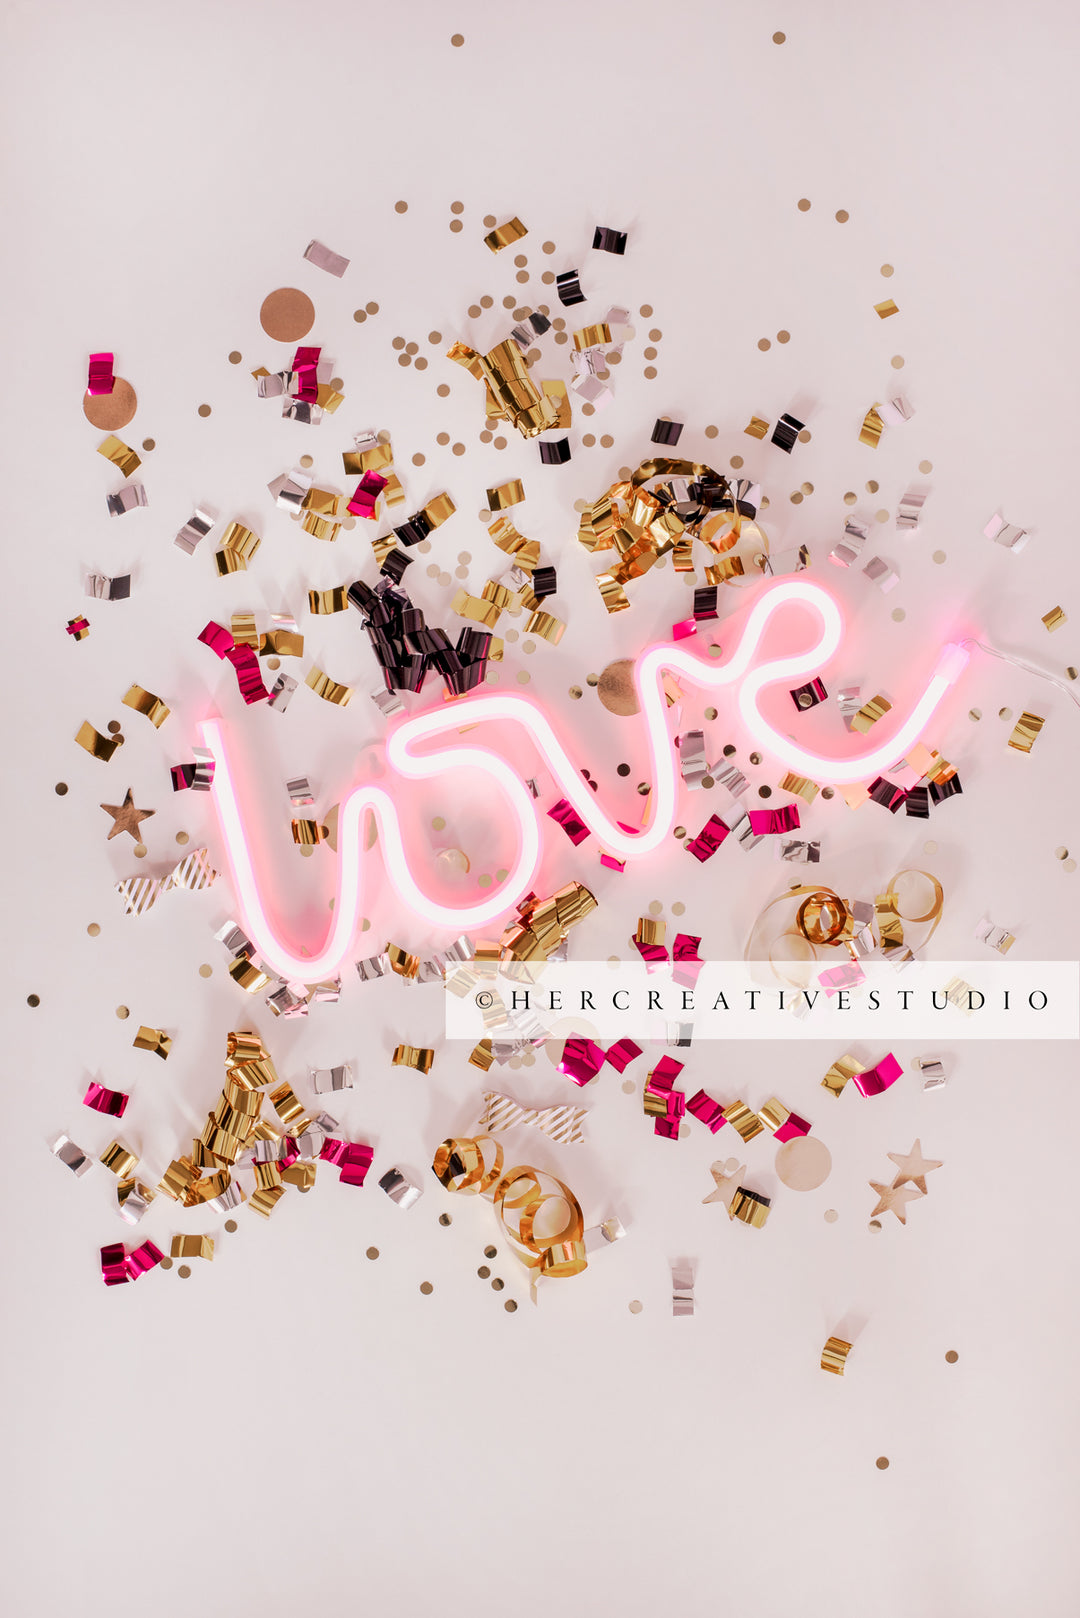 Neon Pink 'Love' with Confetti, Styled Stock Image